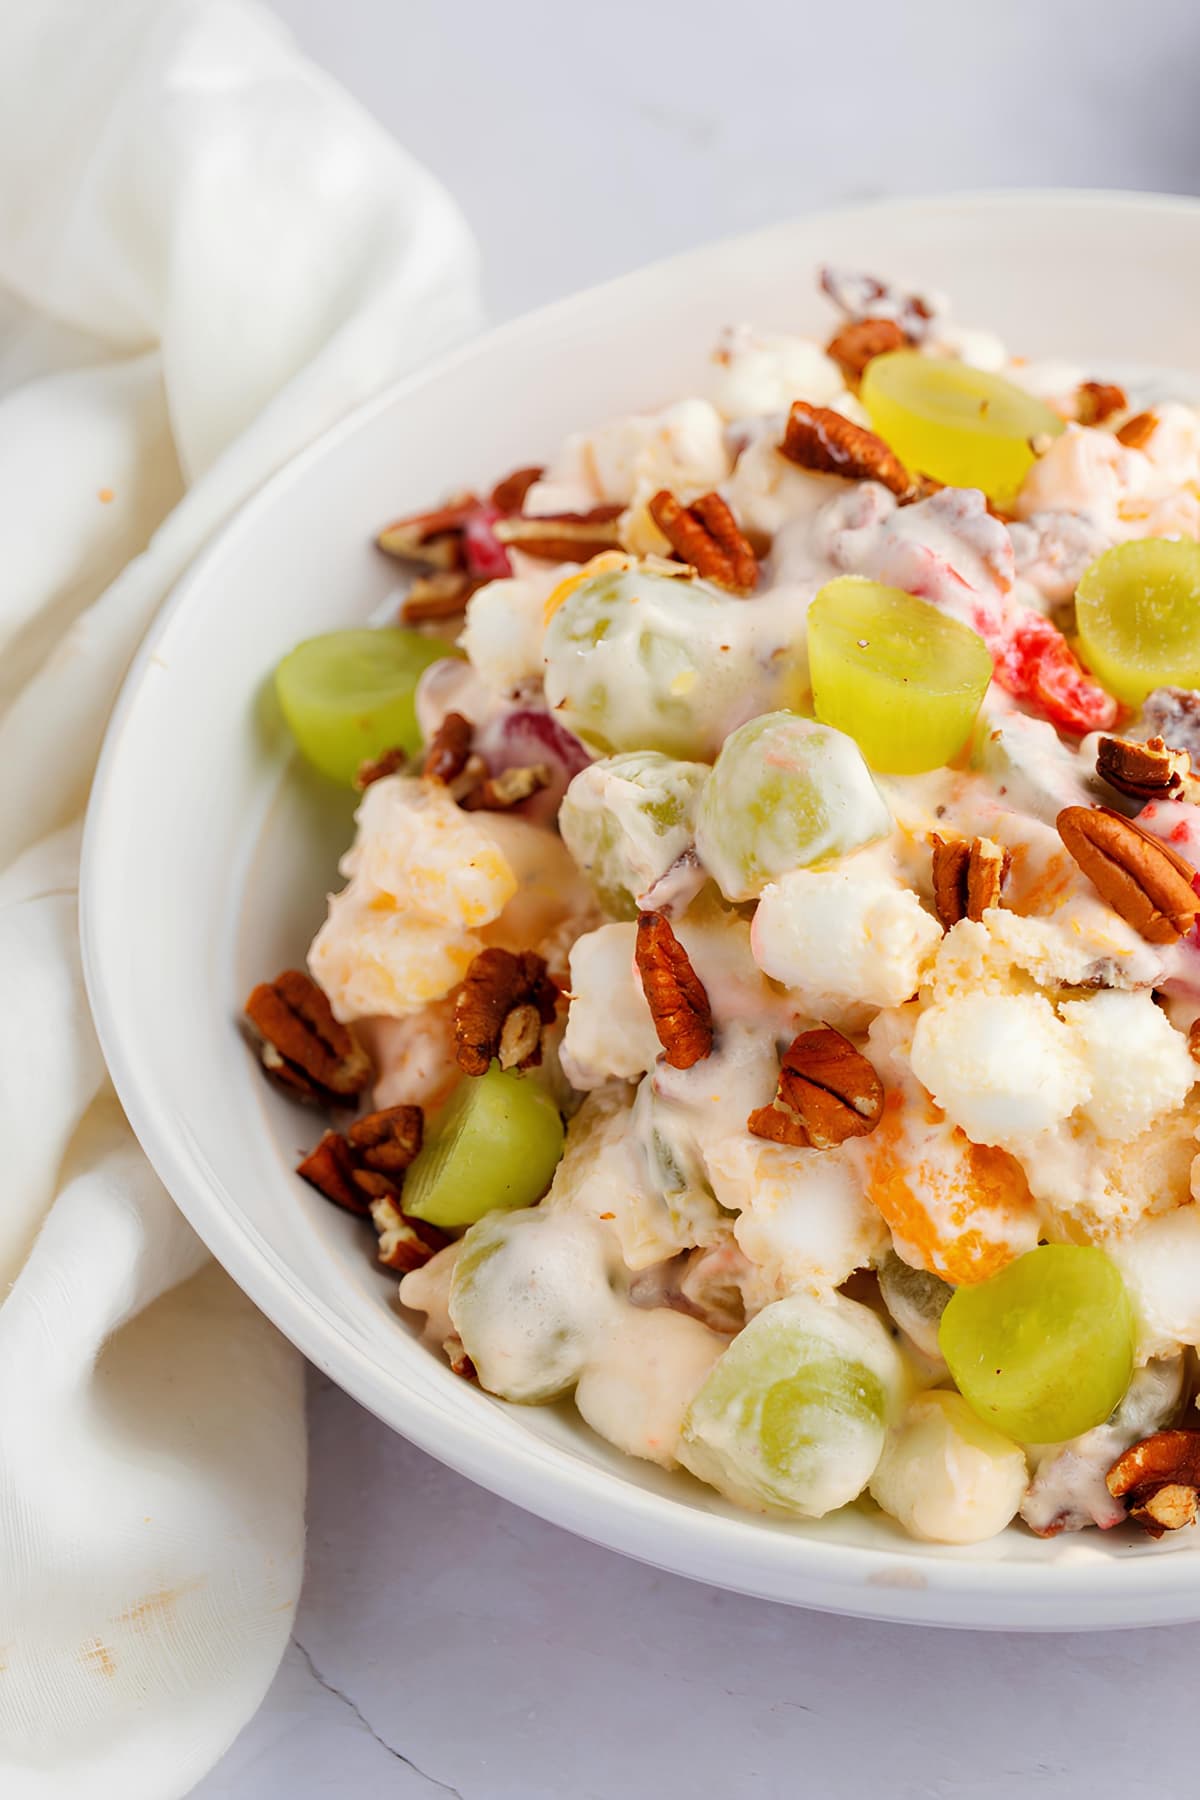 Christmas fruit salad with grapes, marshmallows, cherries and pecan nuts.